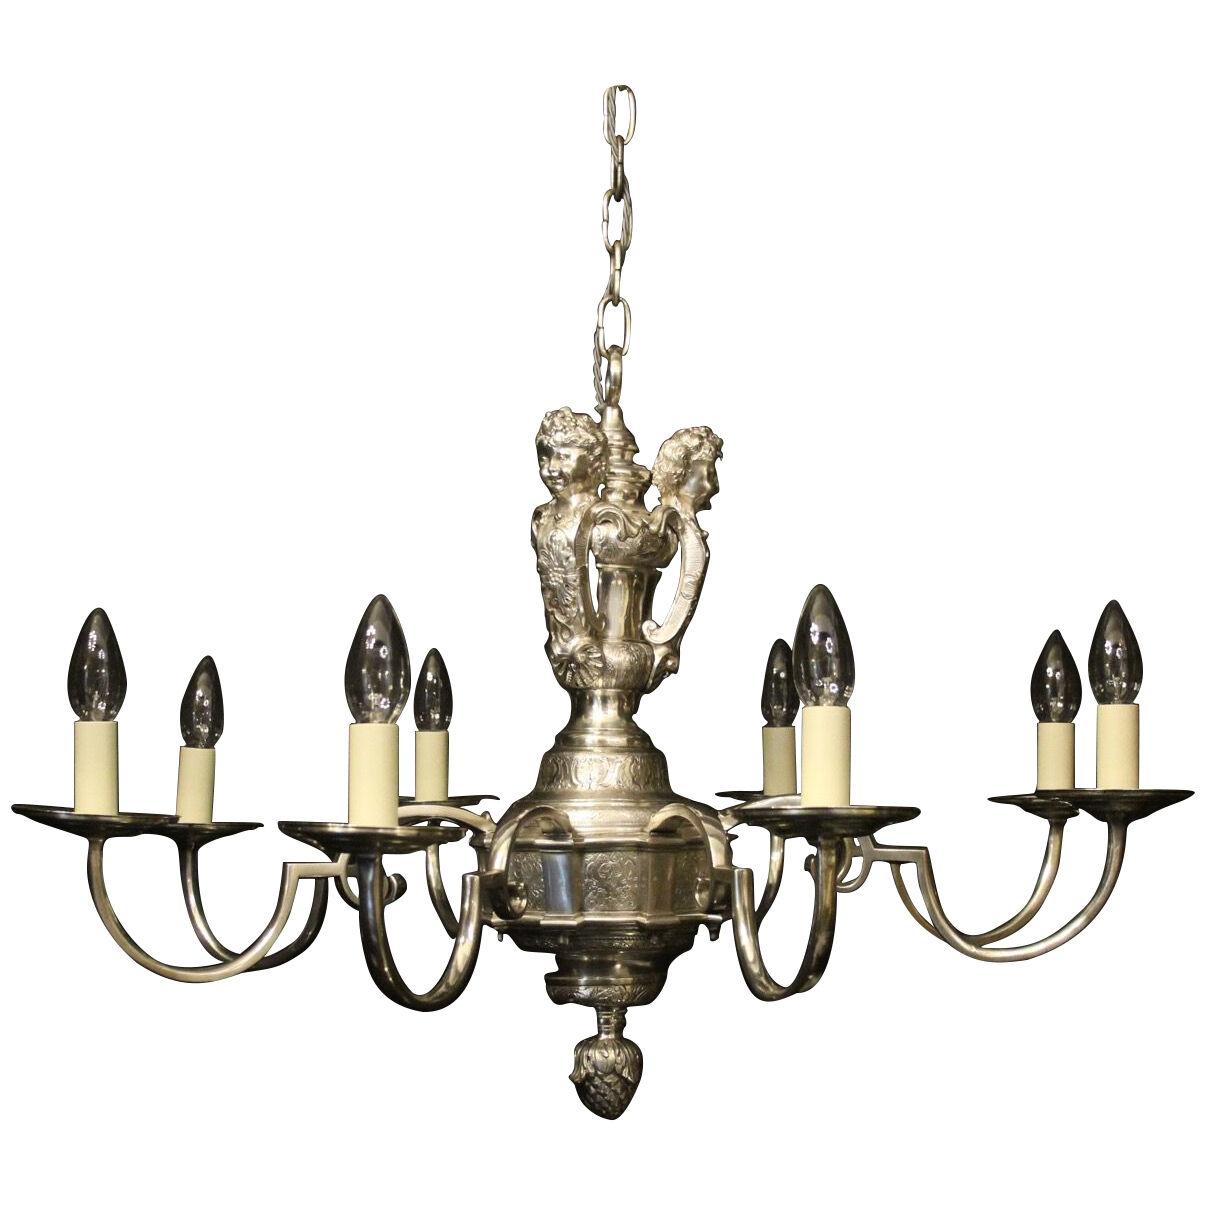 English Silver Plated 8 Light Antique Chandelier